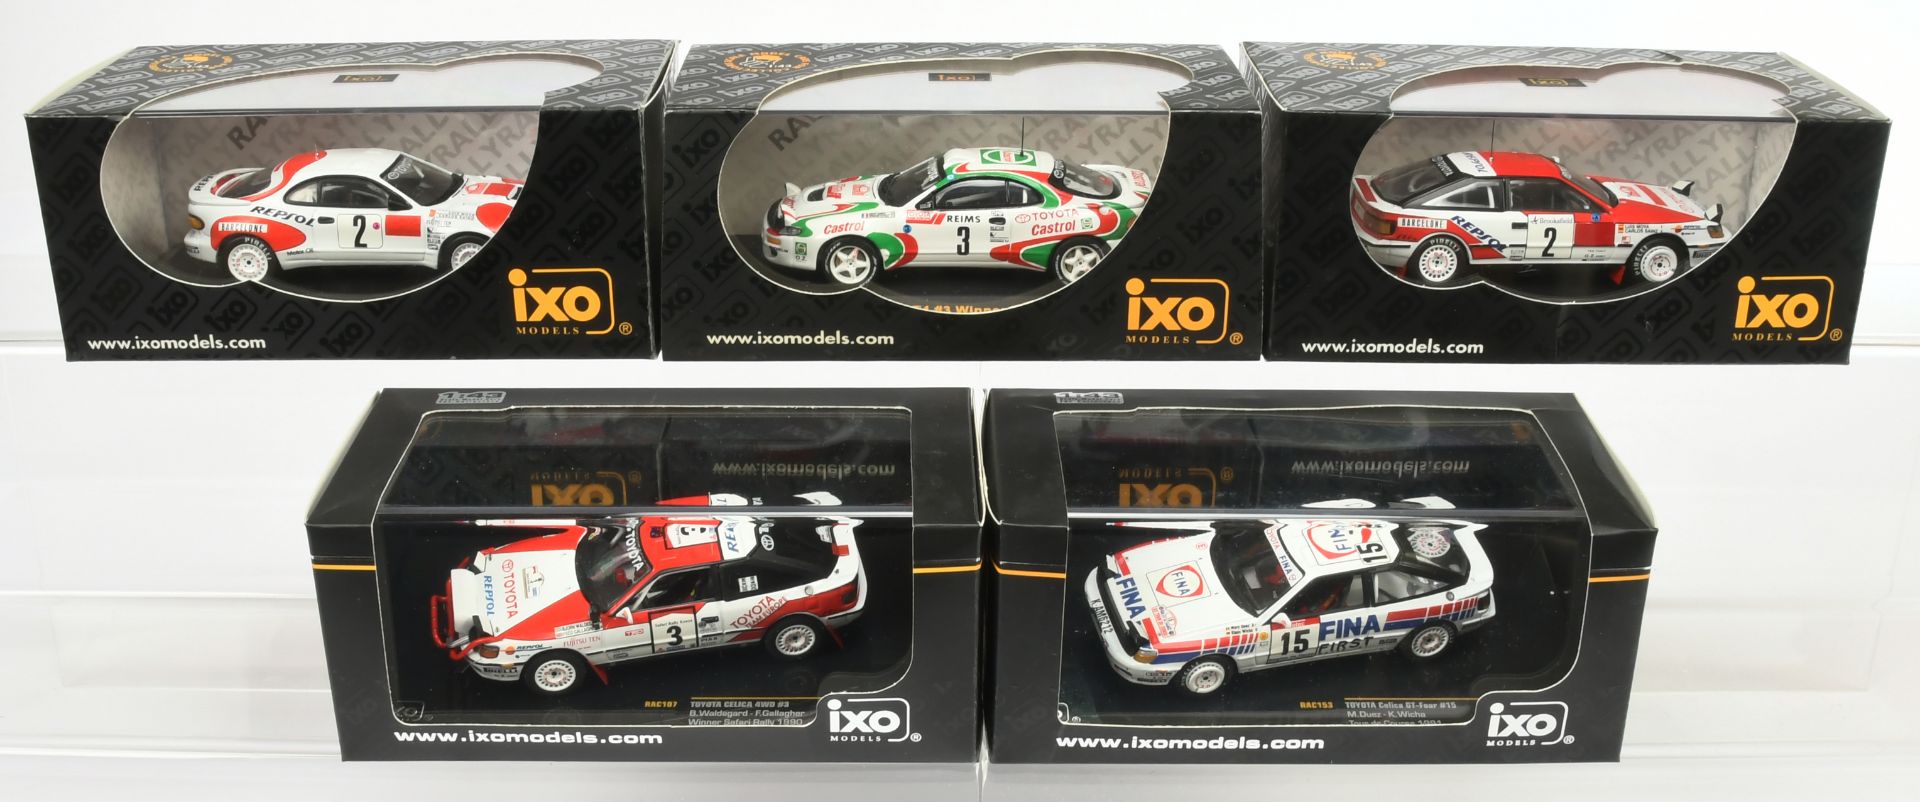 Ixo Models (1/43 Scale) a group of Toyota Celica